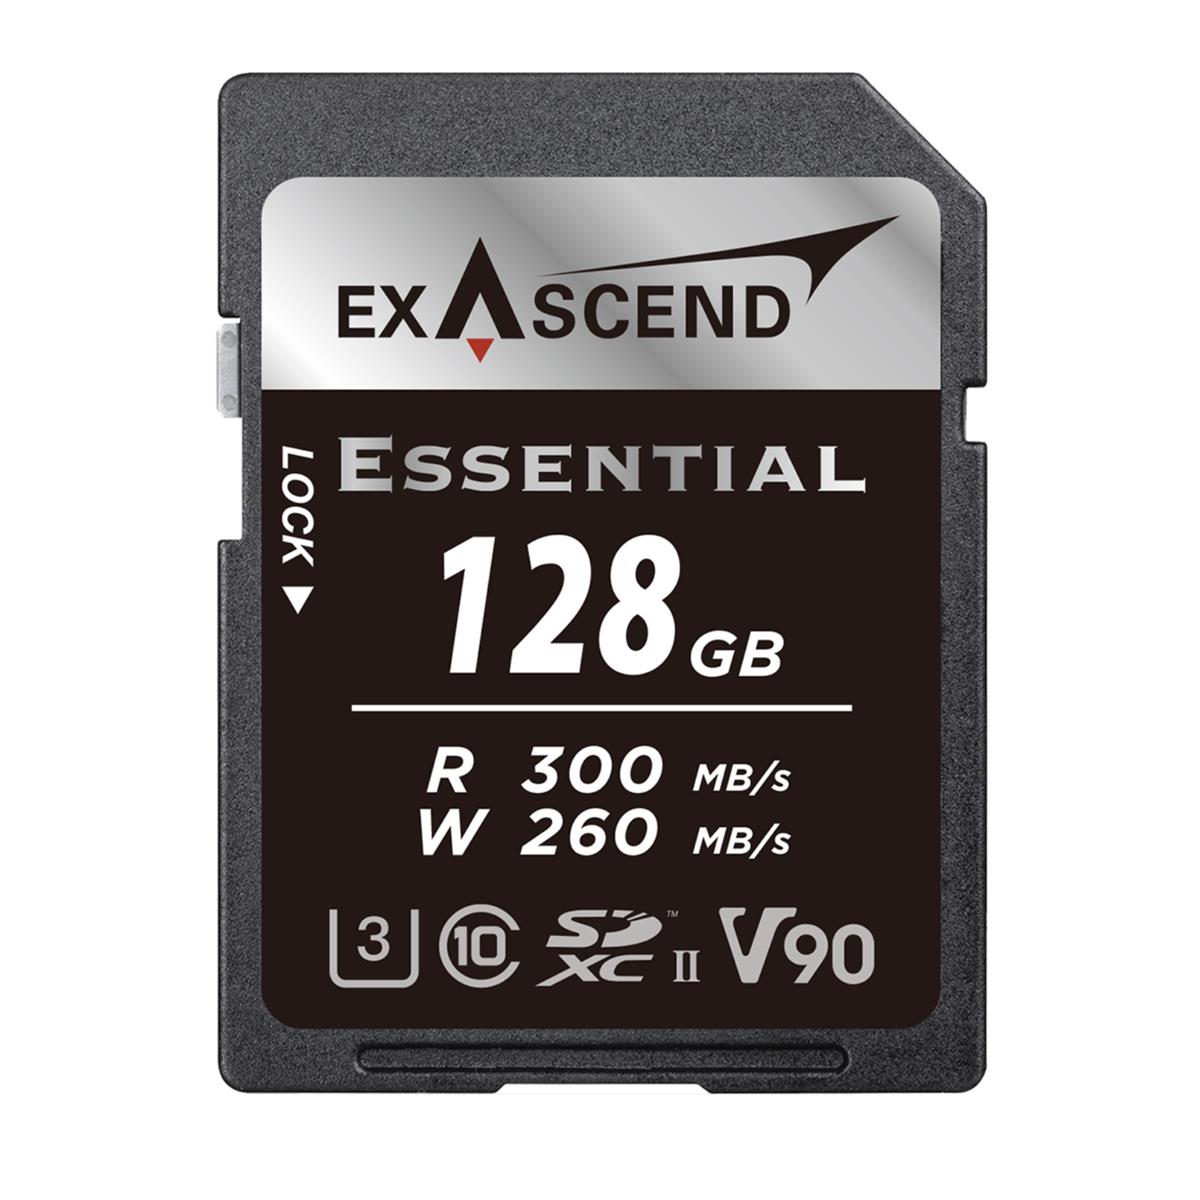 Image of Exascend Essential 128GB UHS-II V90 SDXC Memory Card